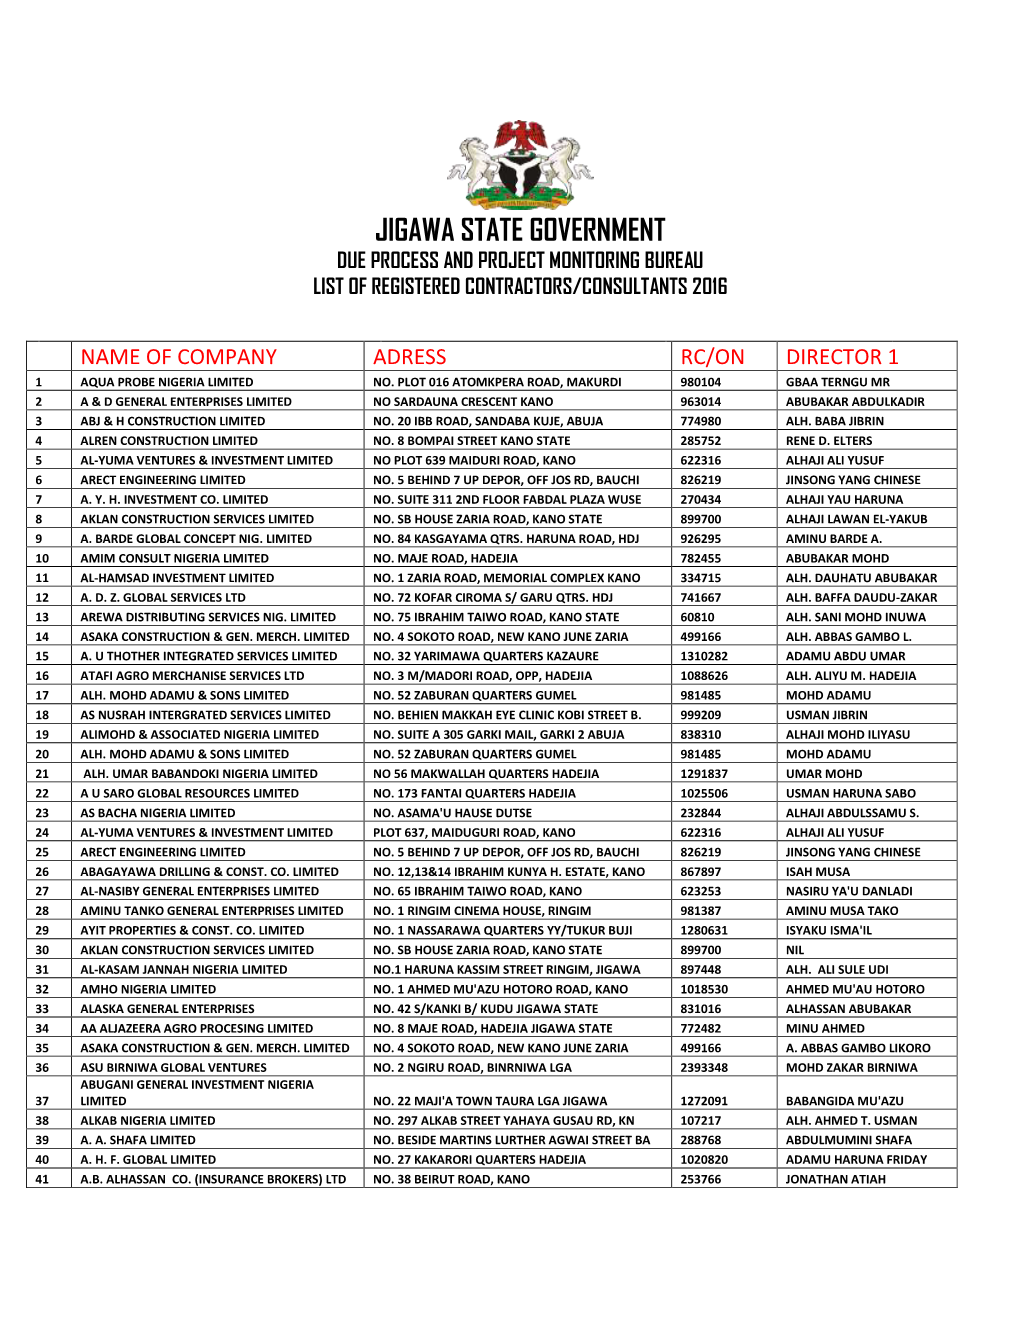 Jigawa State Government Due Process and Project Monitoring Bureau List of Registered Contractors/Consultants 2016